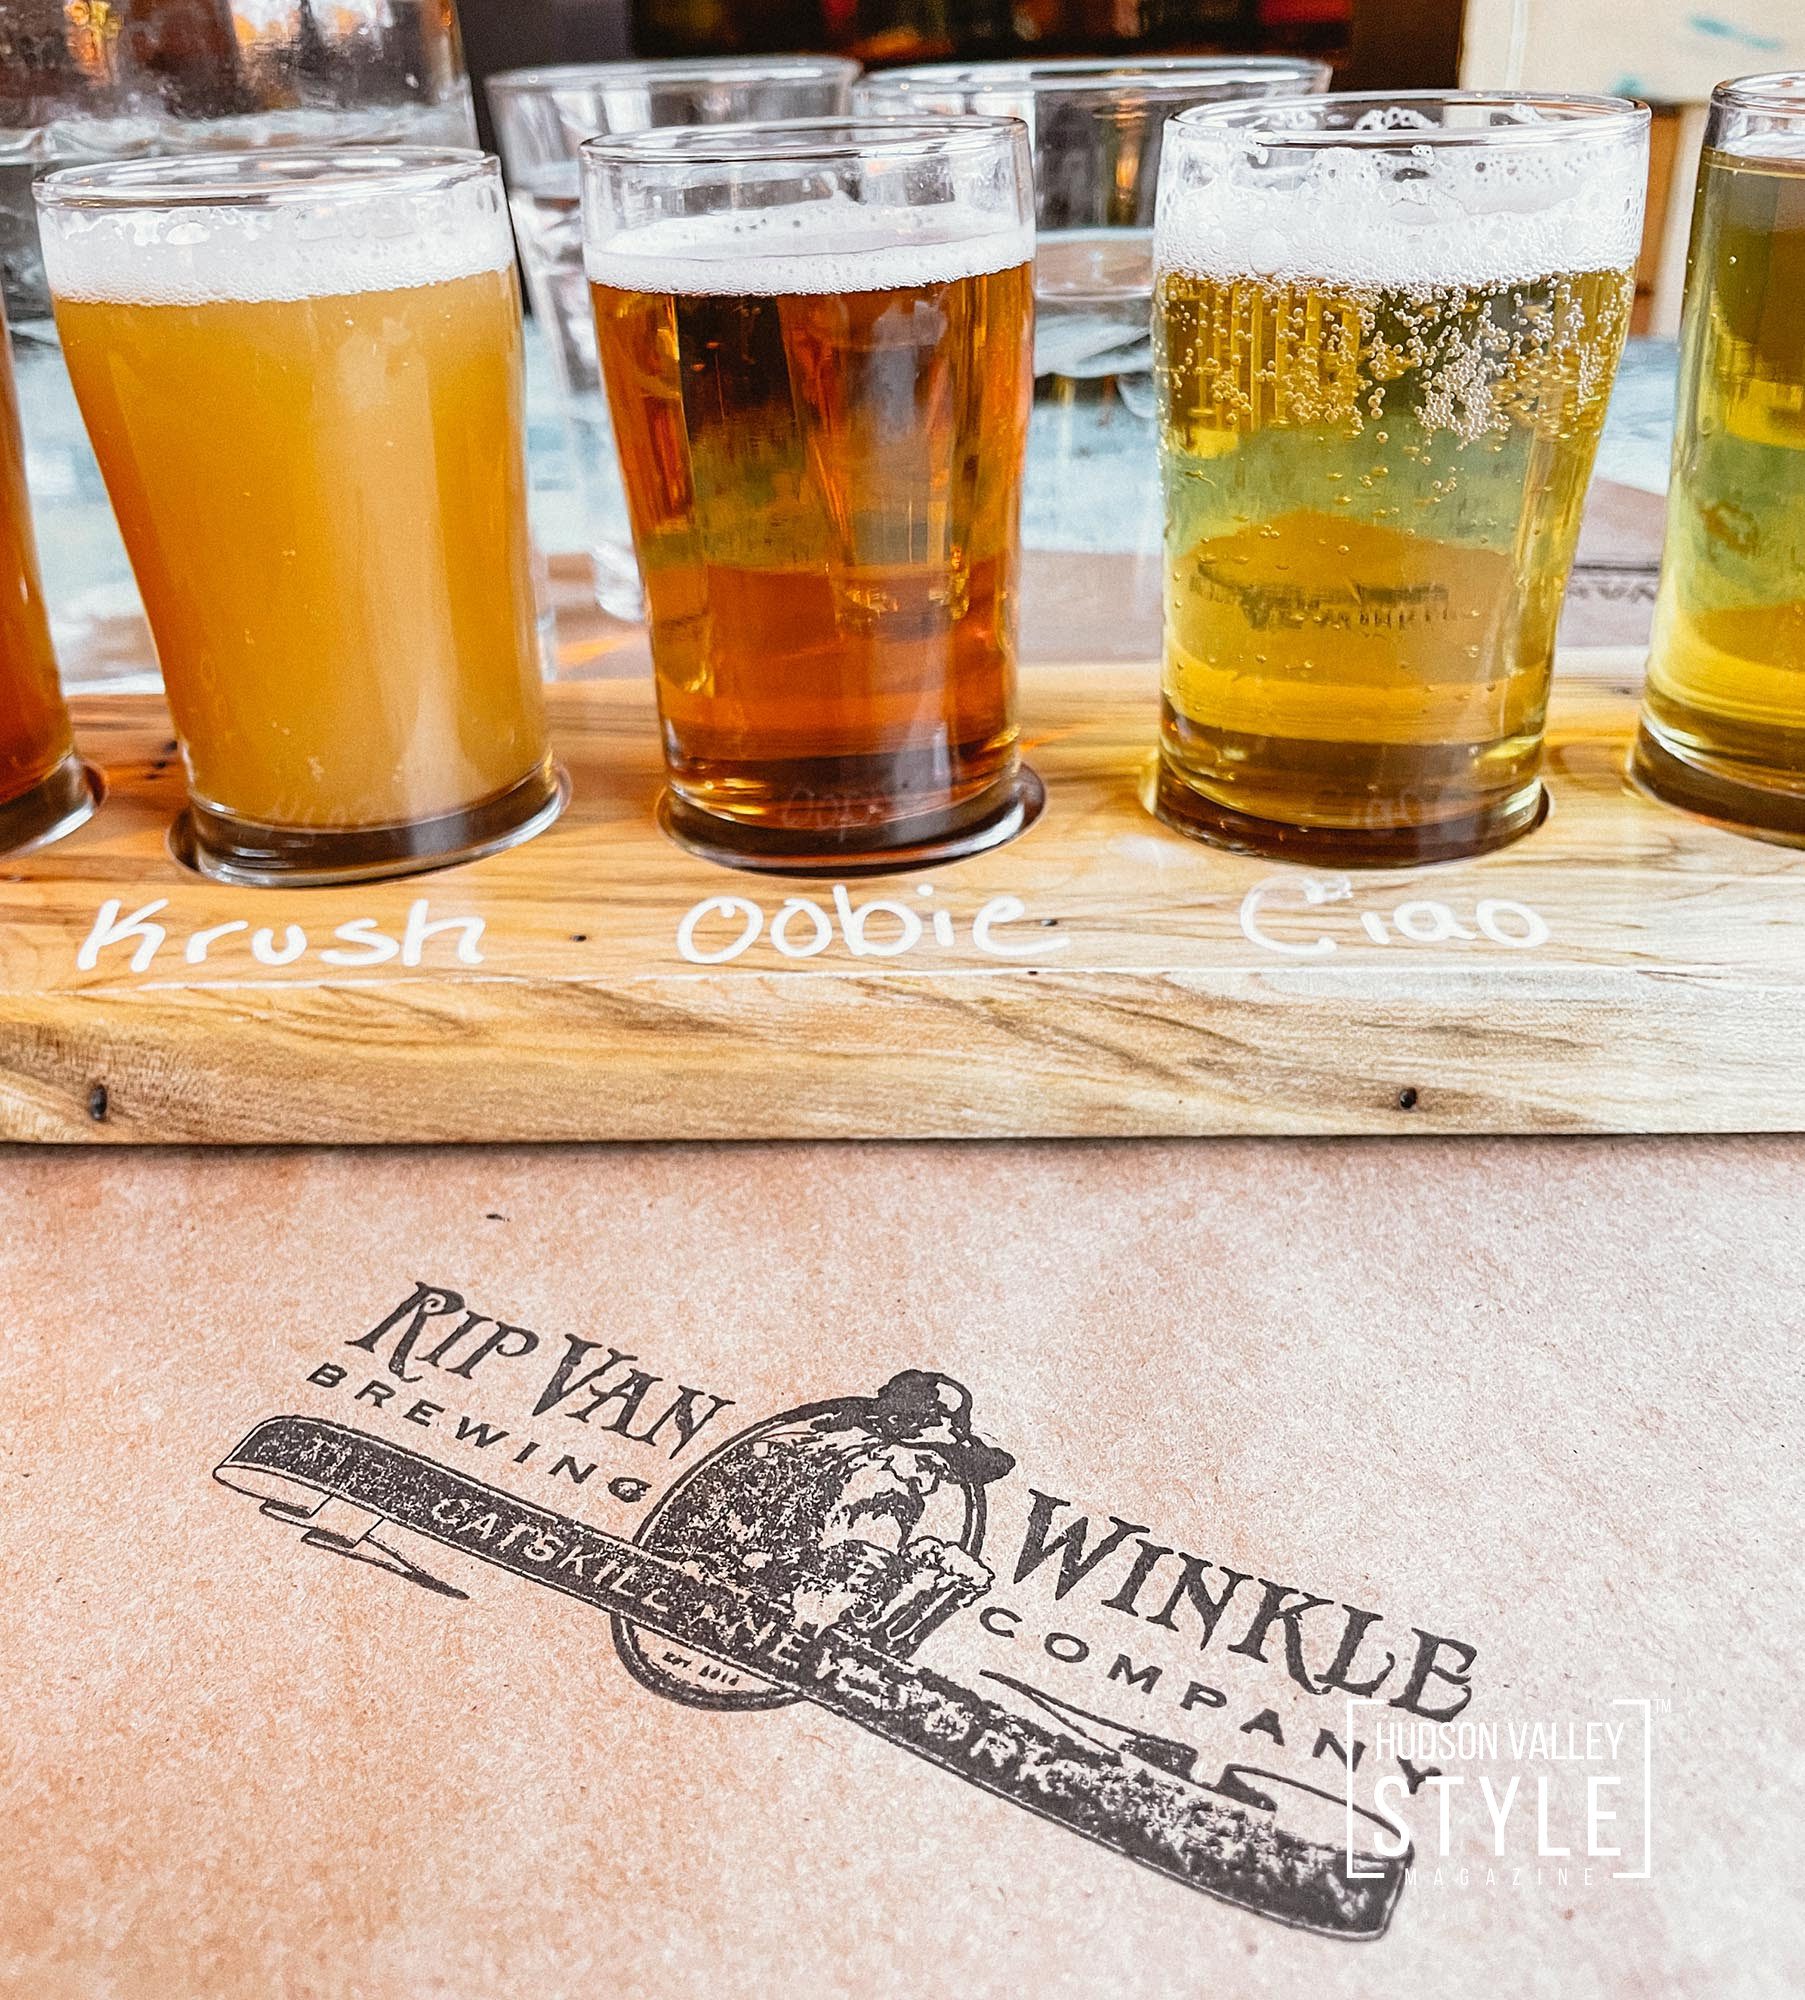 Experience the Best in Craft Beer and Delicious Food at Rip Van Winkle Restaurant and Brewery in Catskill, NY – Hudson Valley Style Magazine's Restaurant Reviews with Maxwell Alexander